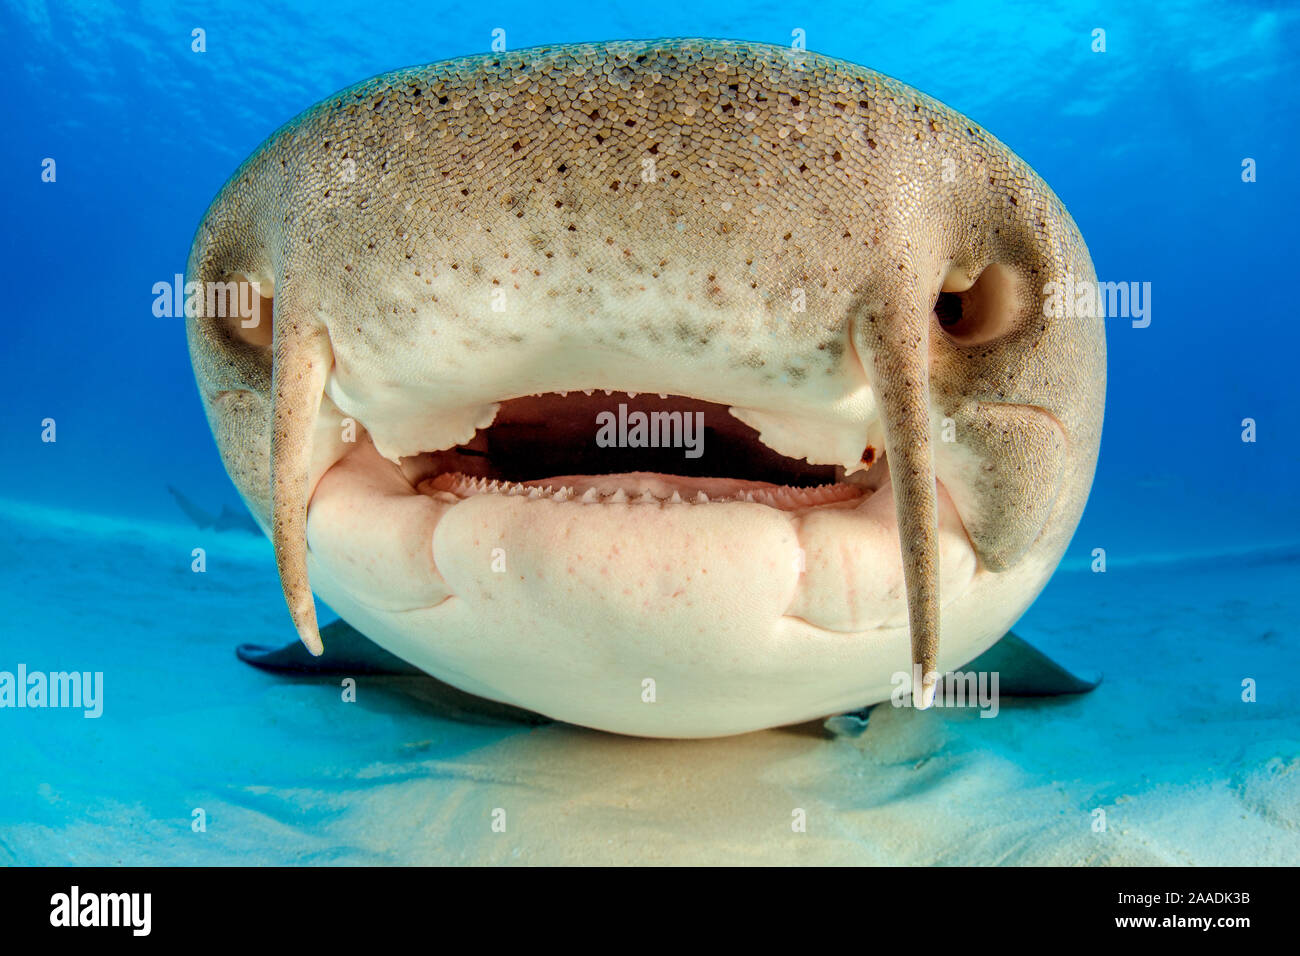 Close up portrait of the face of a Nurse shark (Ginglymostoma cirratum) resting on the sand in shallow water. Its barbels are clearly visible on its top lip. South Bimini, Bahamas. The Bahamas National Shark Sanctuary. Gulf Stream, West Atlantic Ocean. Stock Photo